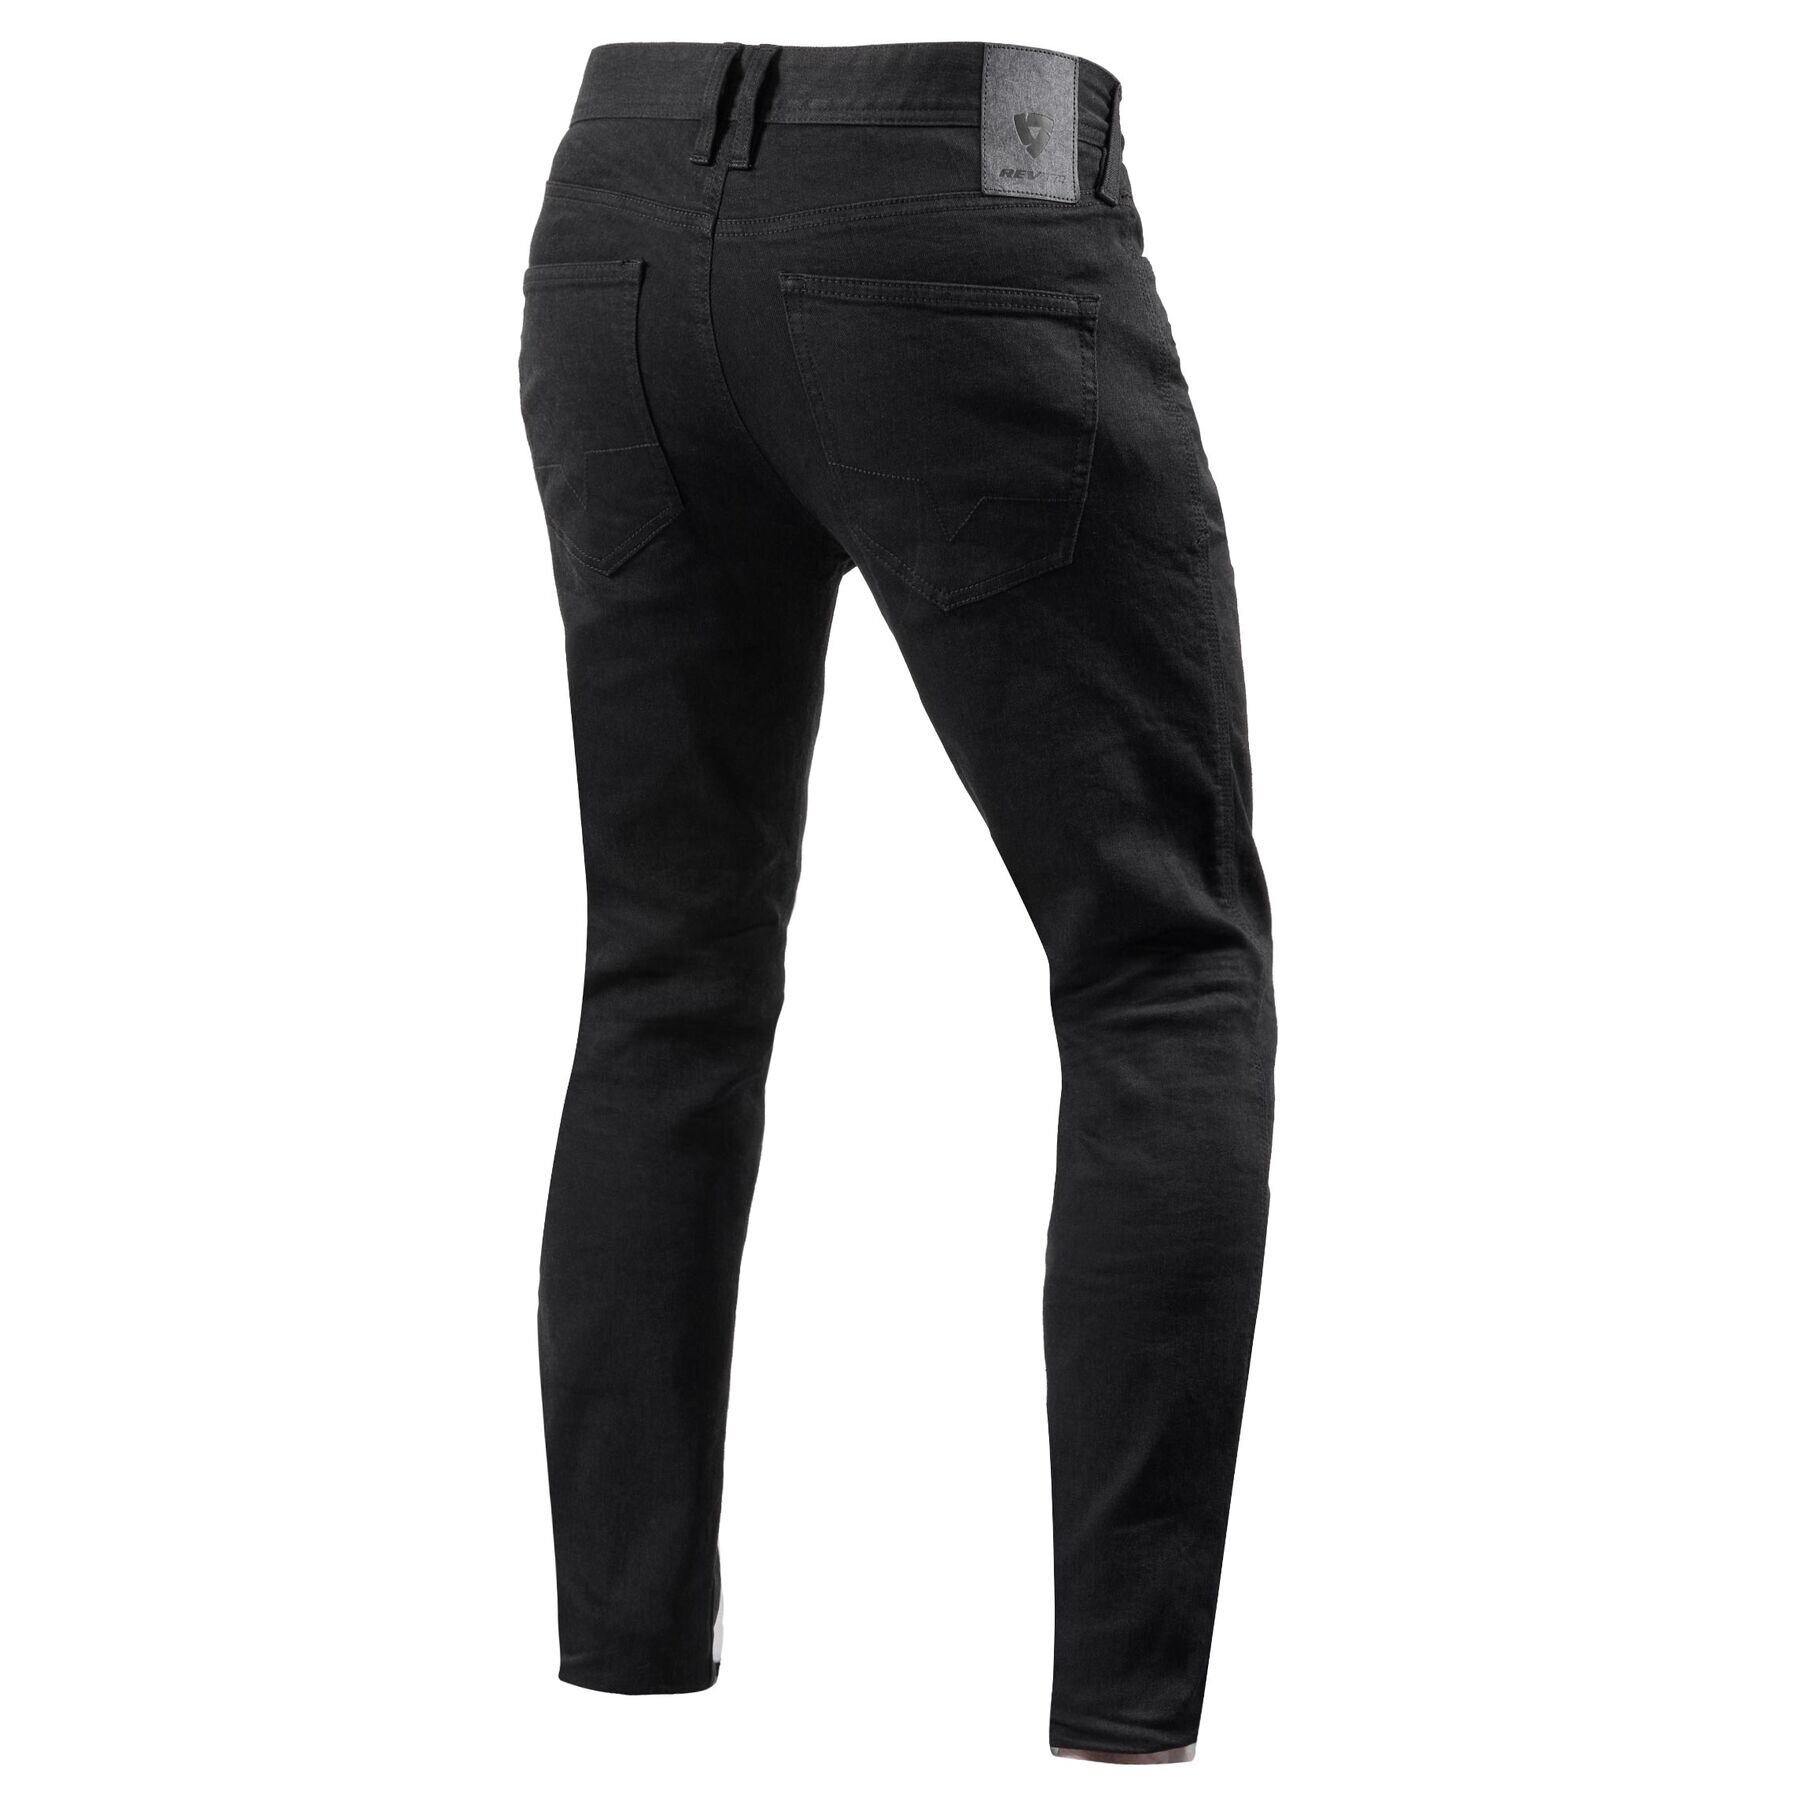 Leather Motorcycle Trousers | Leather Motorbike Pants – GetGeared.co.uk